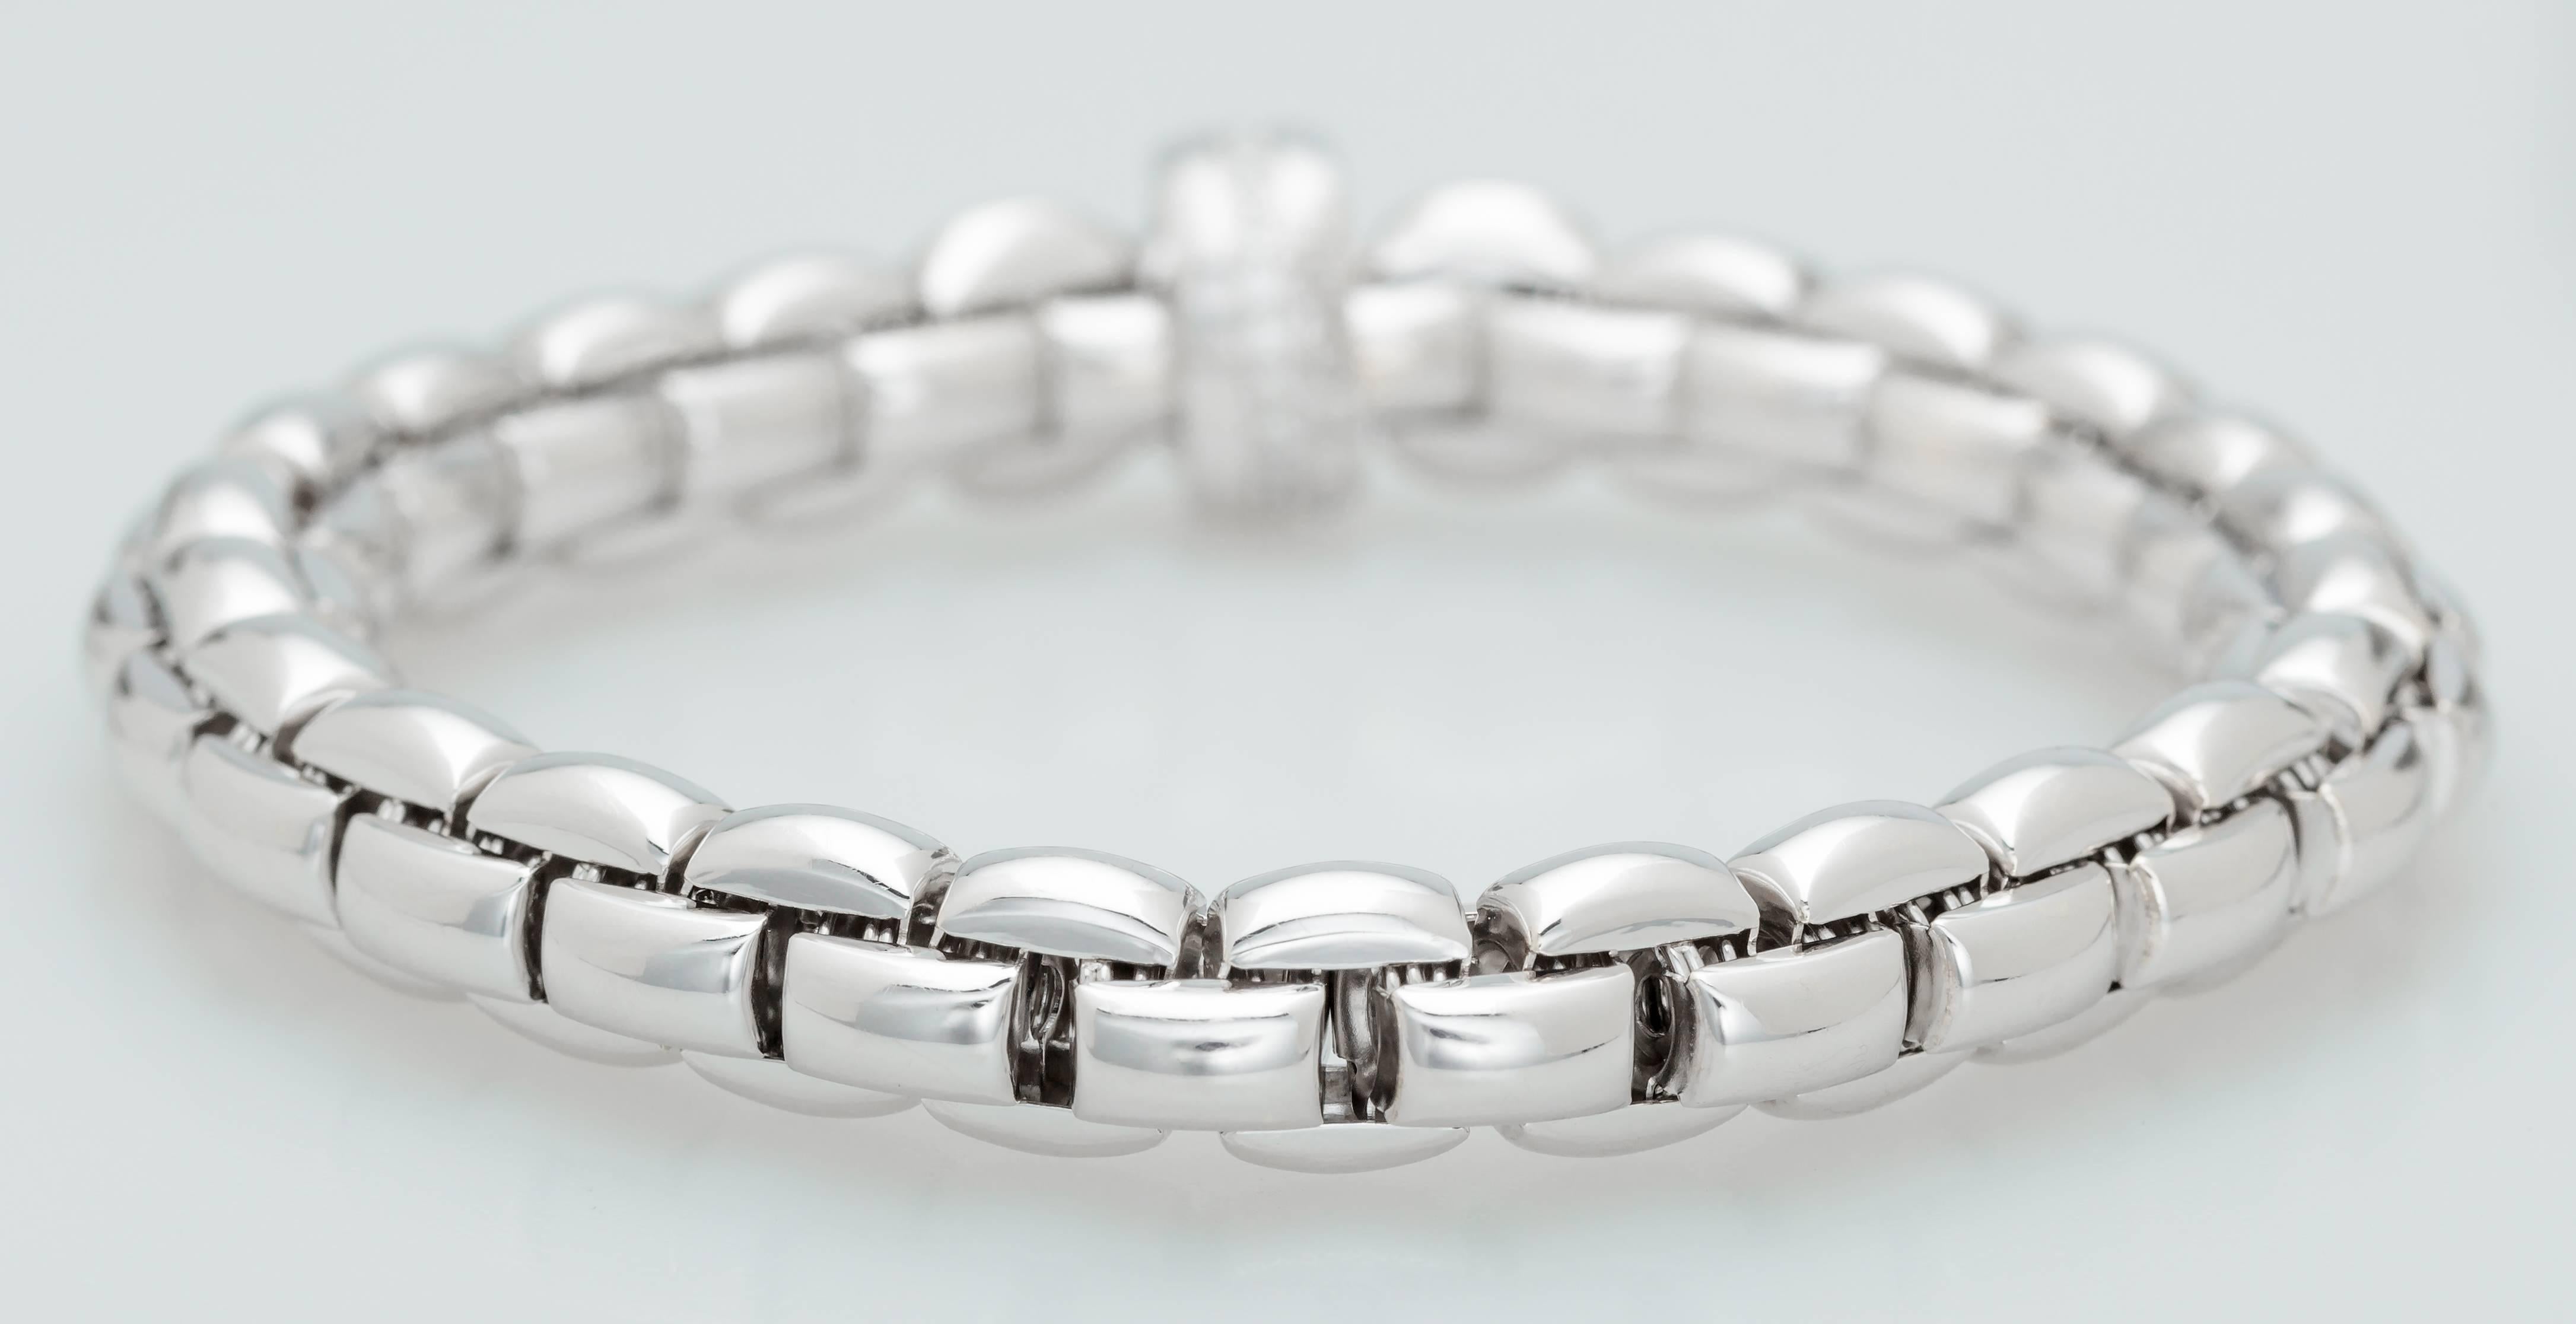 This Fope Flex It 18K white gold bracelet stretches to fit over your hand.  It has a rondel set with 23 diamonds totaling 0.21ct.  The bracelet fits a 15cm wrist.  The rondel measures 8mm in diameter.